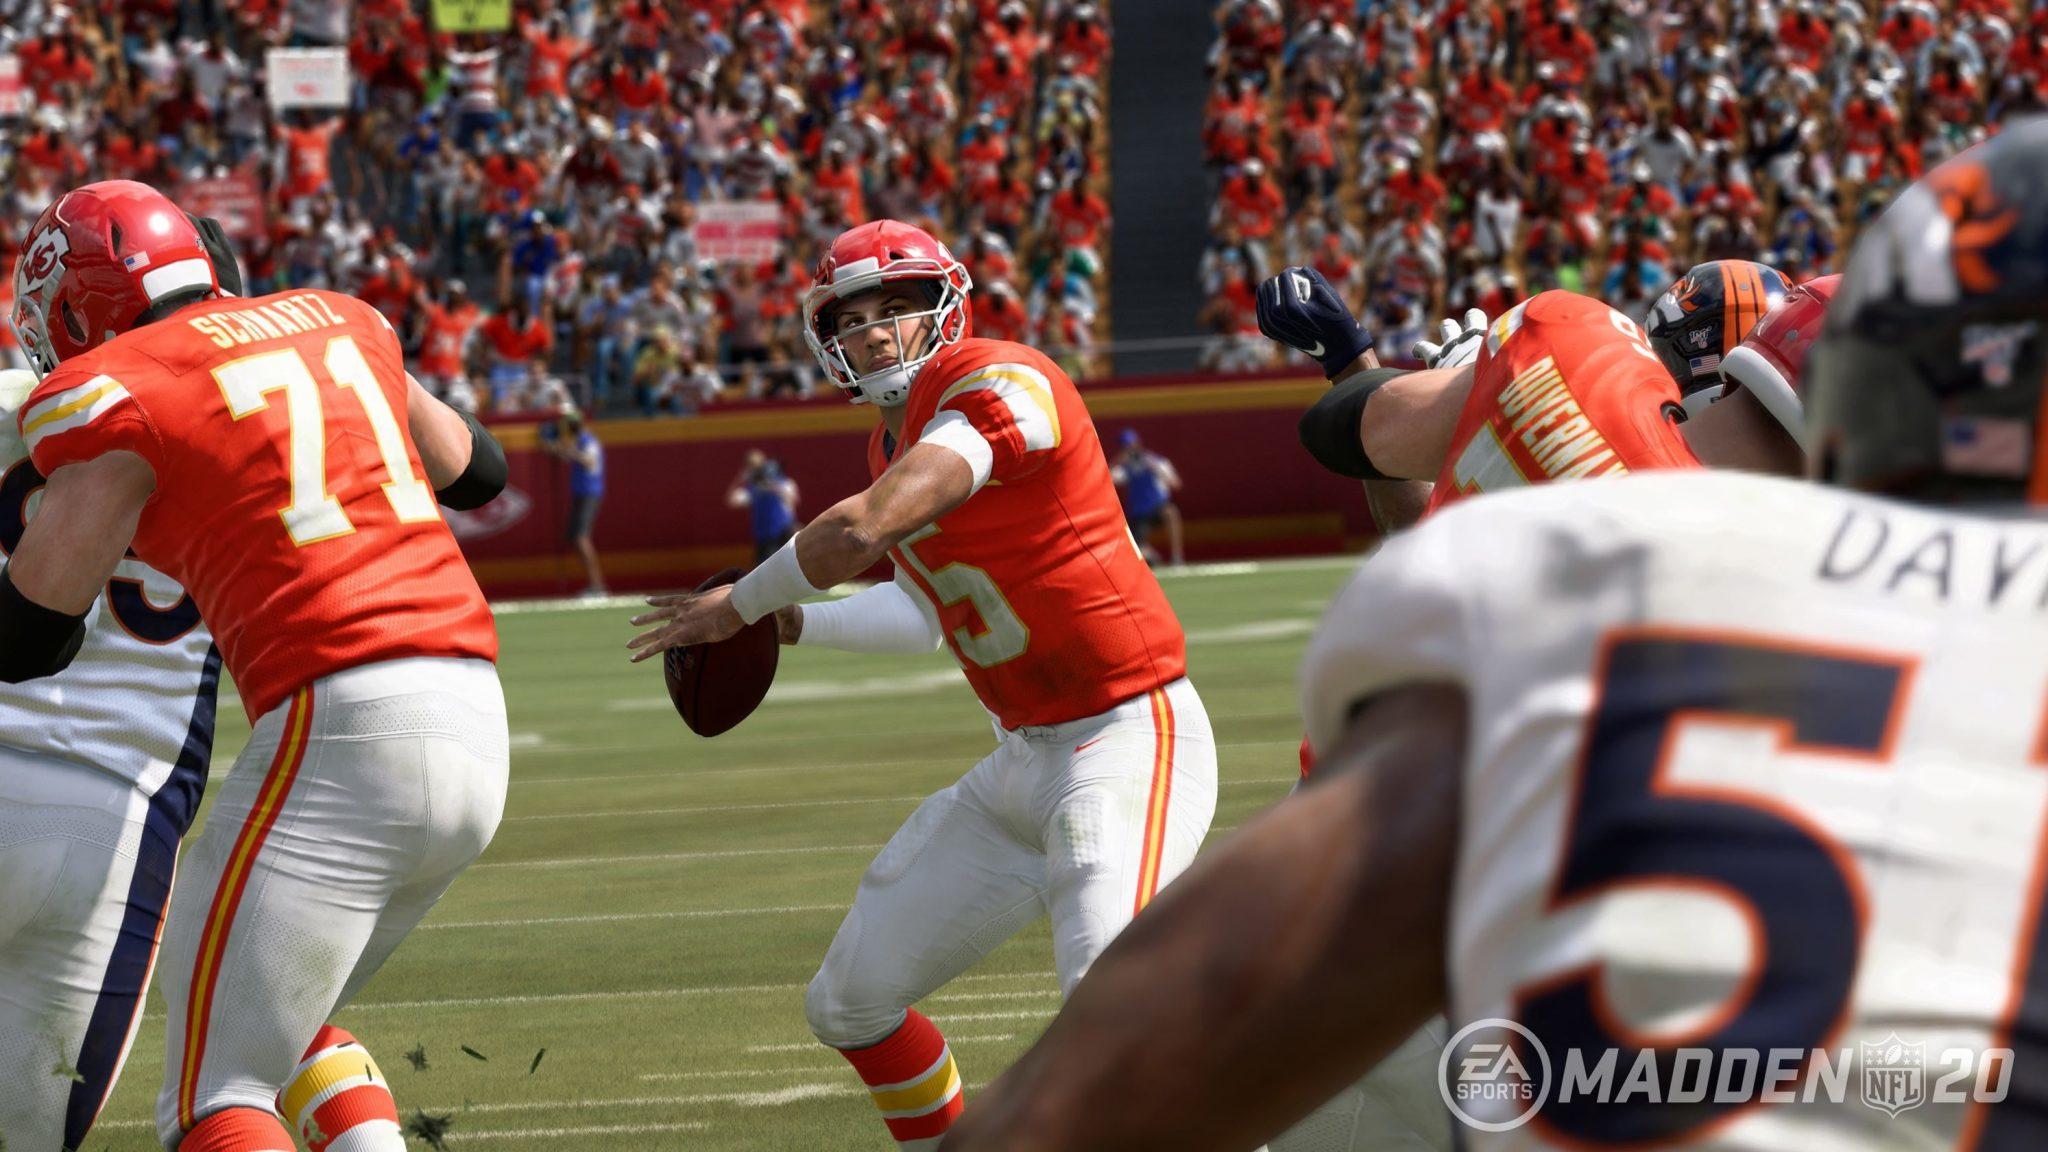 How New Features Are Making Madden NFL 20 the Most Challenging